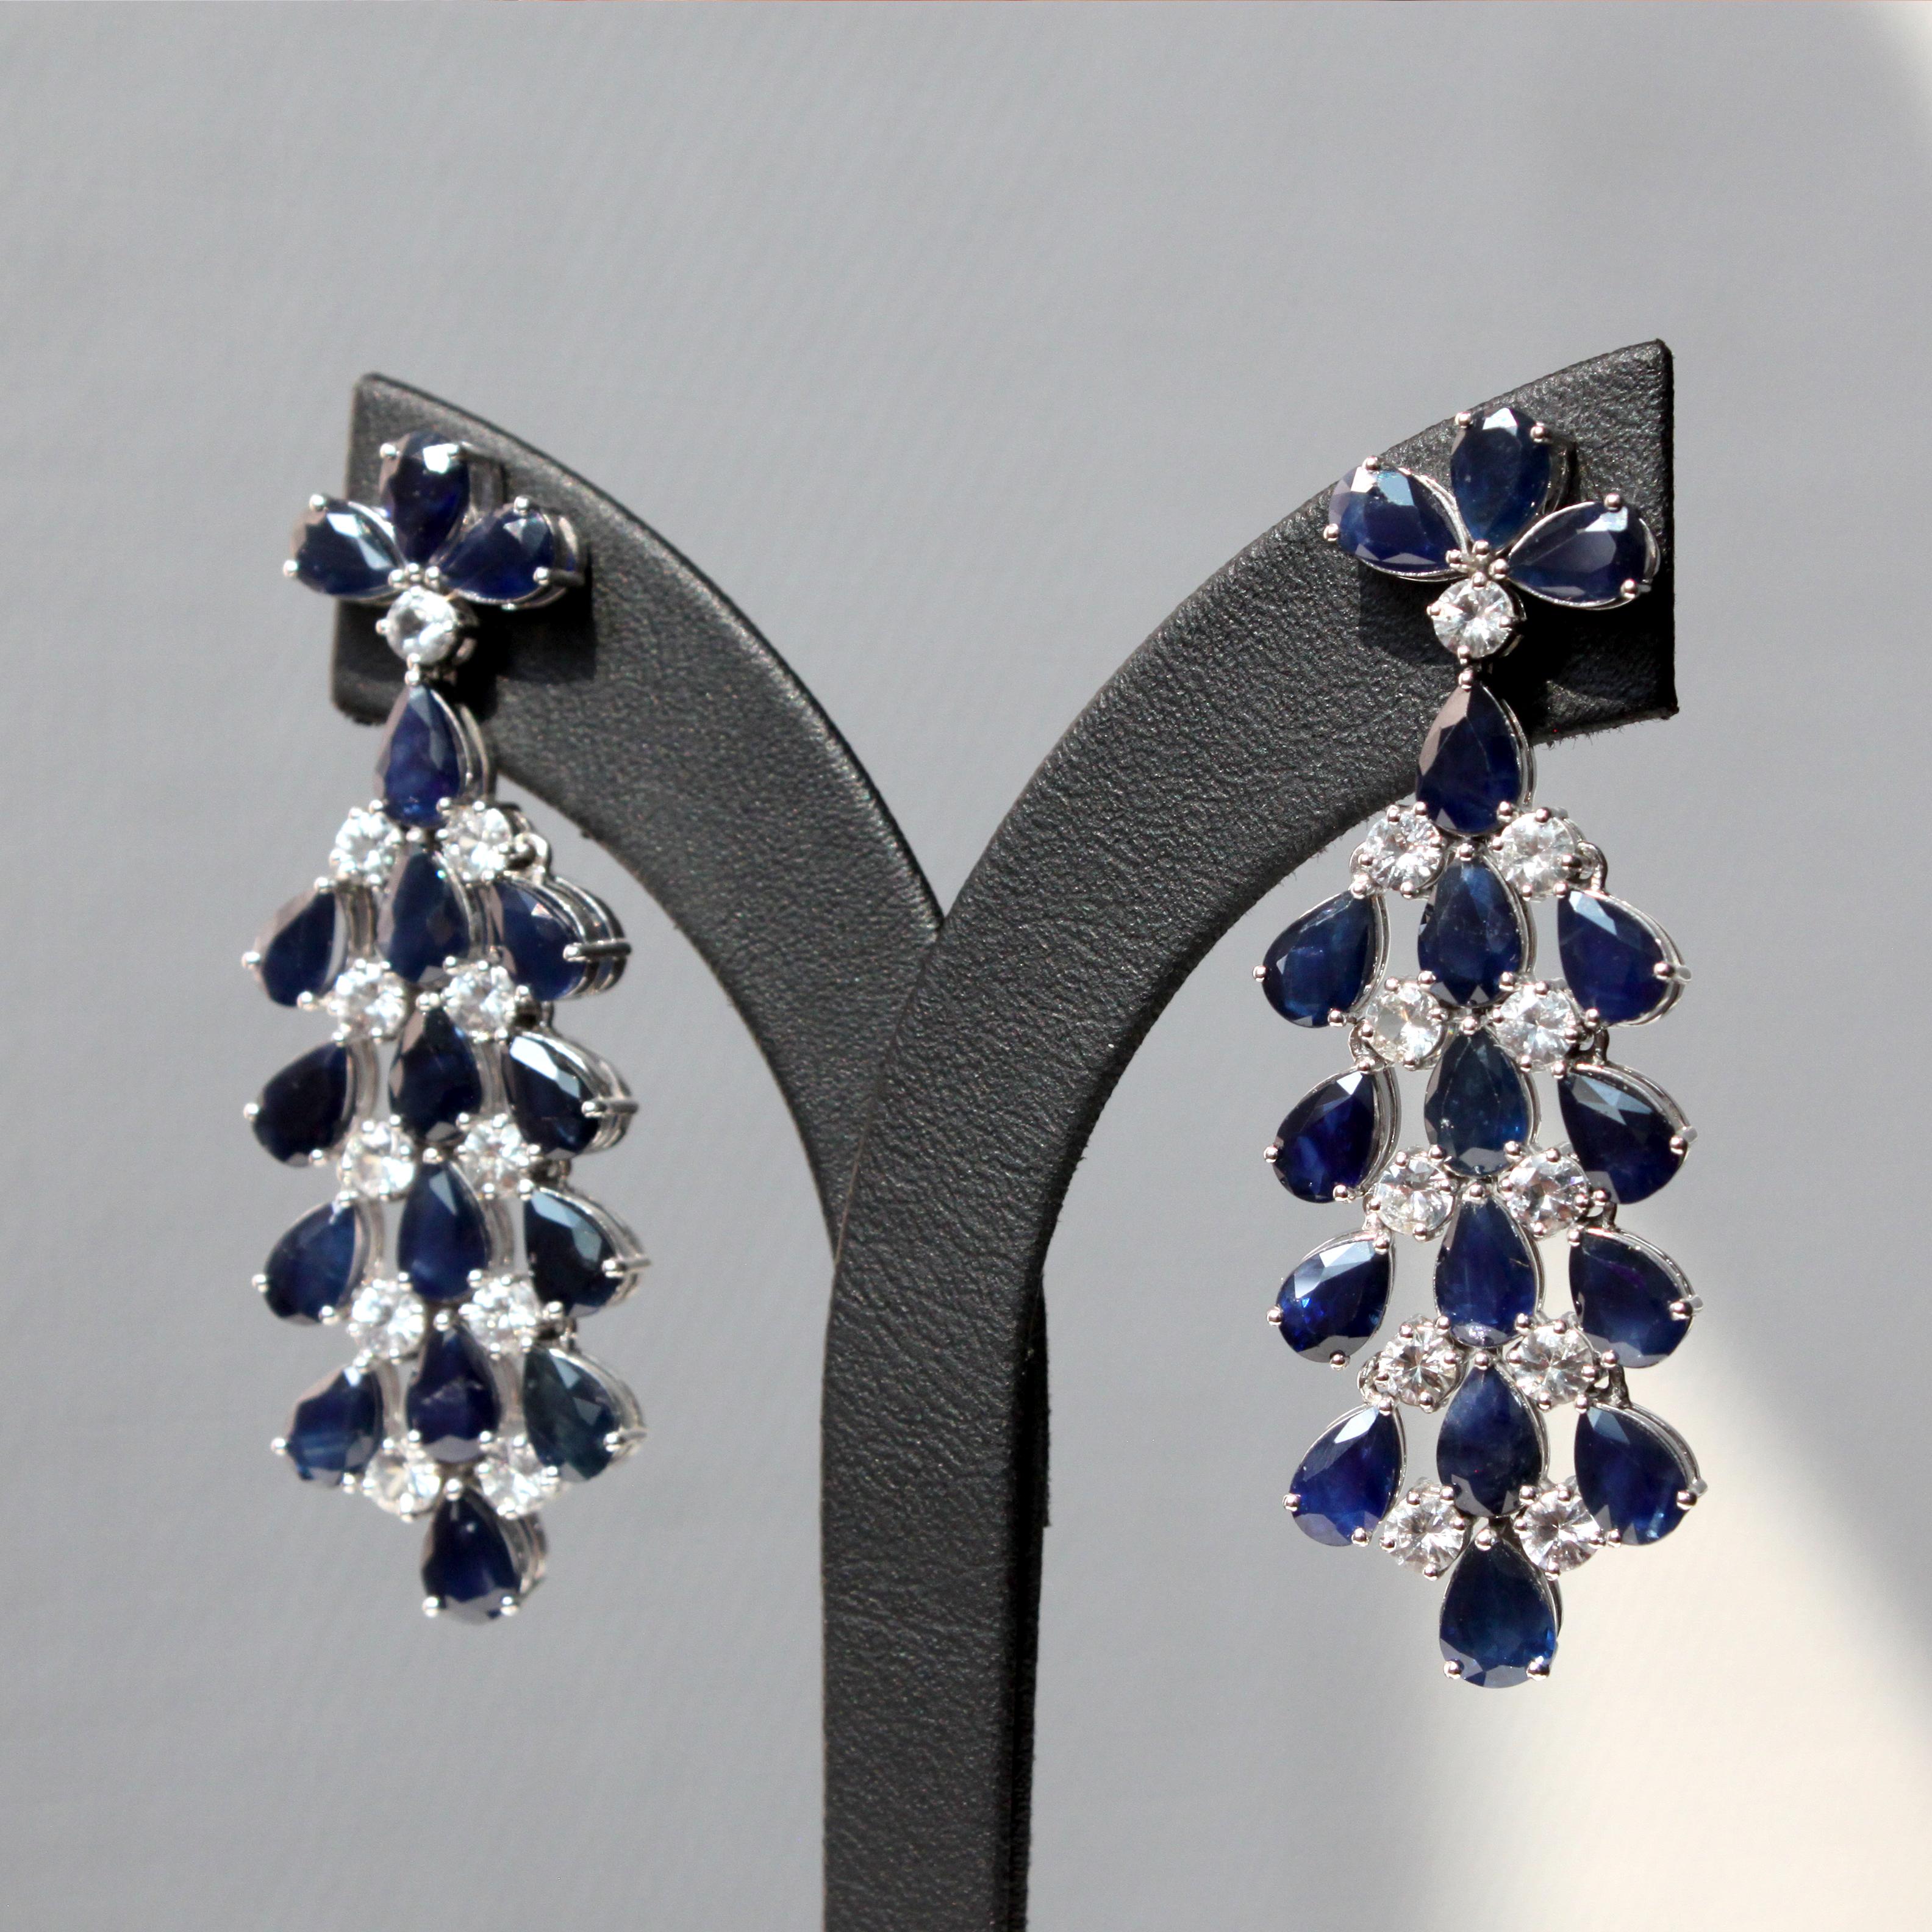 14K white gold
16.36ct blue sapphire 
2.65ct white sapphire 
Total earring weight 18.8g

These mesmerizing earrings showcase a vibrant cascade of blue sapphires, totaling approximately 16.36 carats, set in glistening 14K white gold. Seventeen